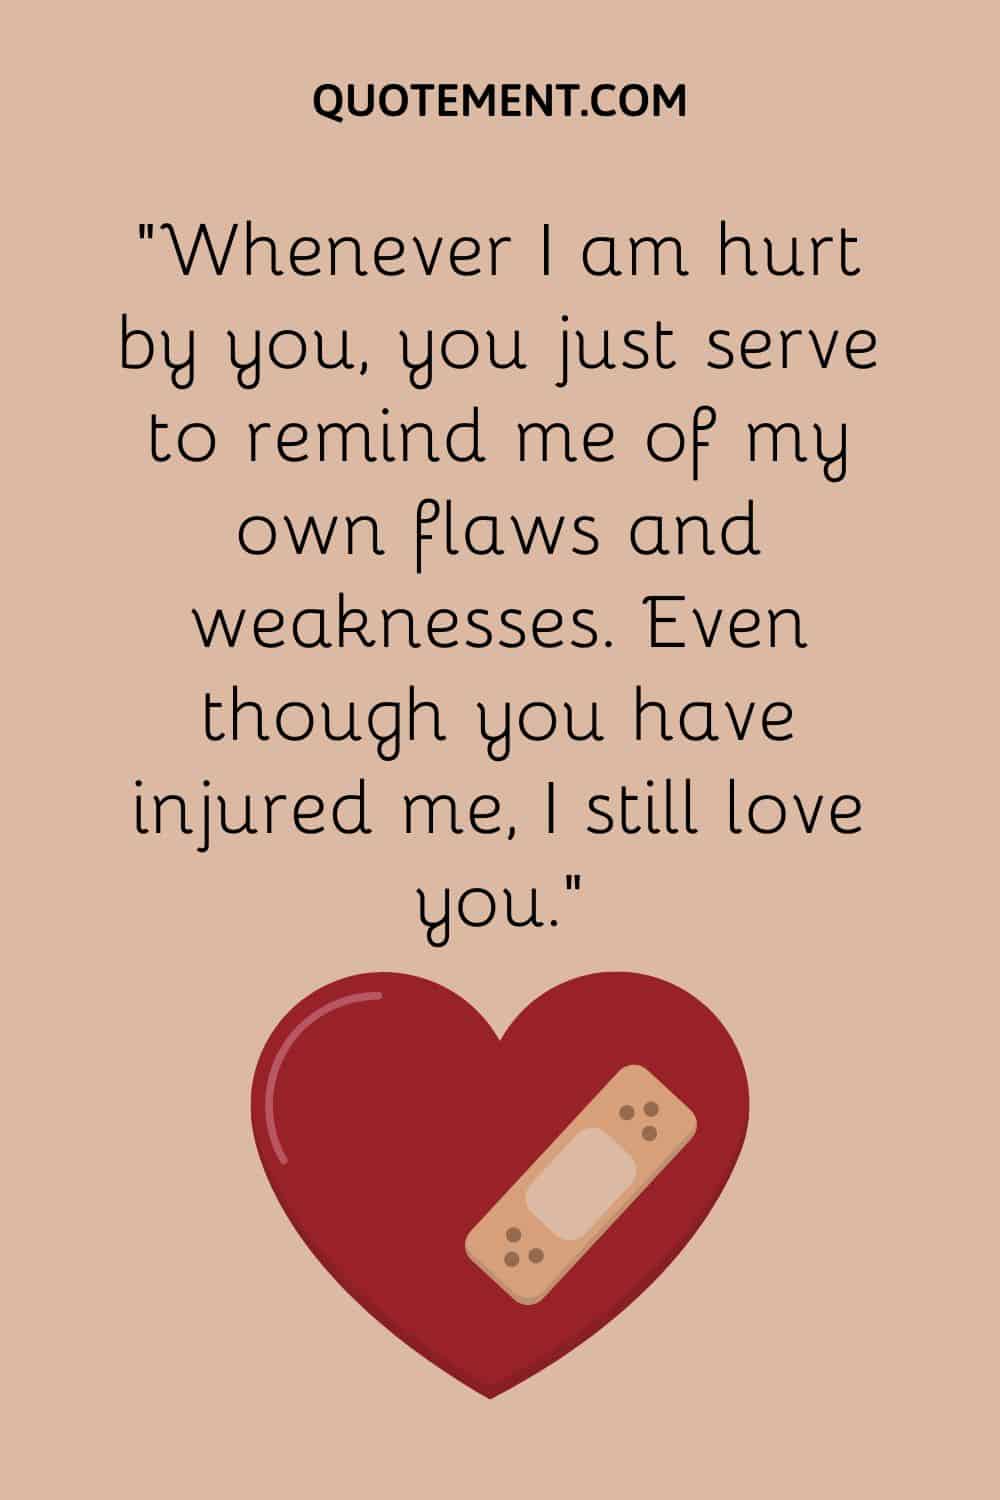 Whenever I am hurt by you, you just serve to remind me of my own flaws and weaknesses